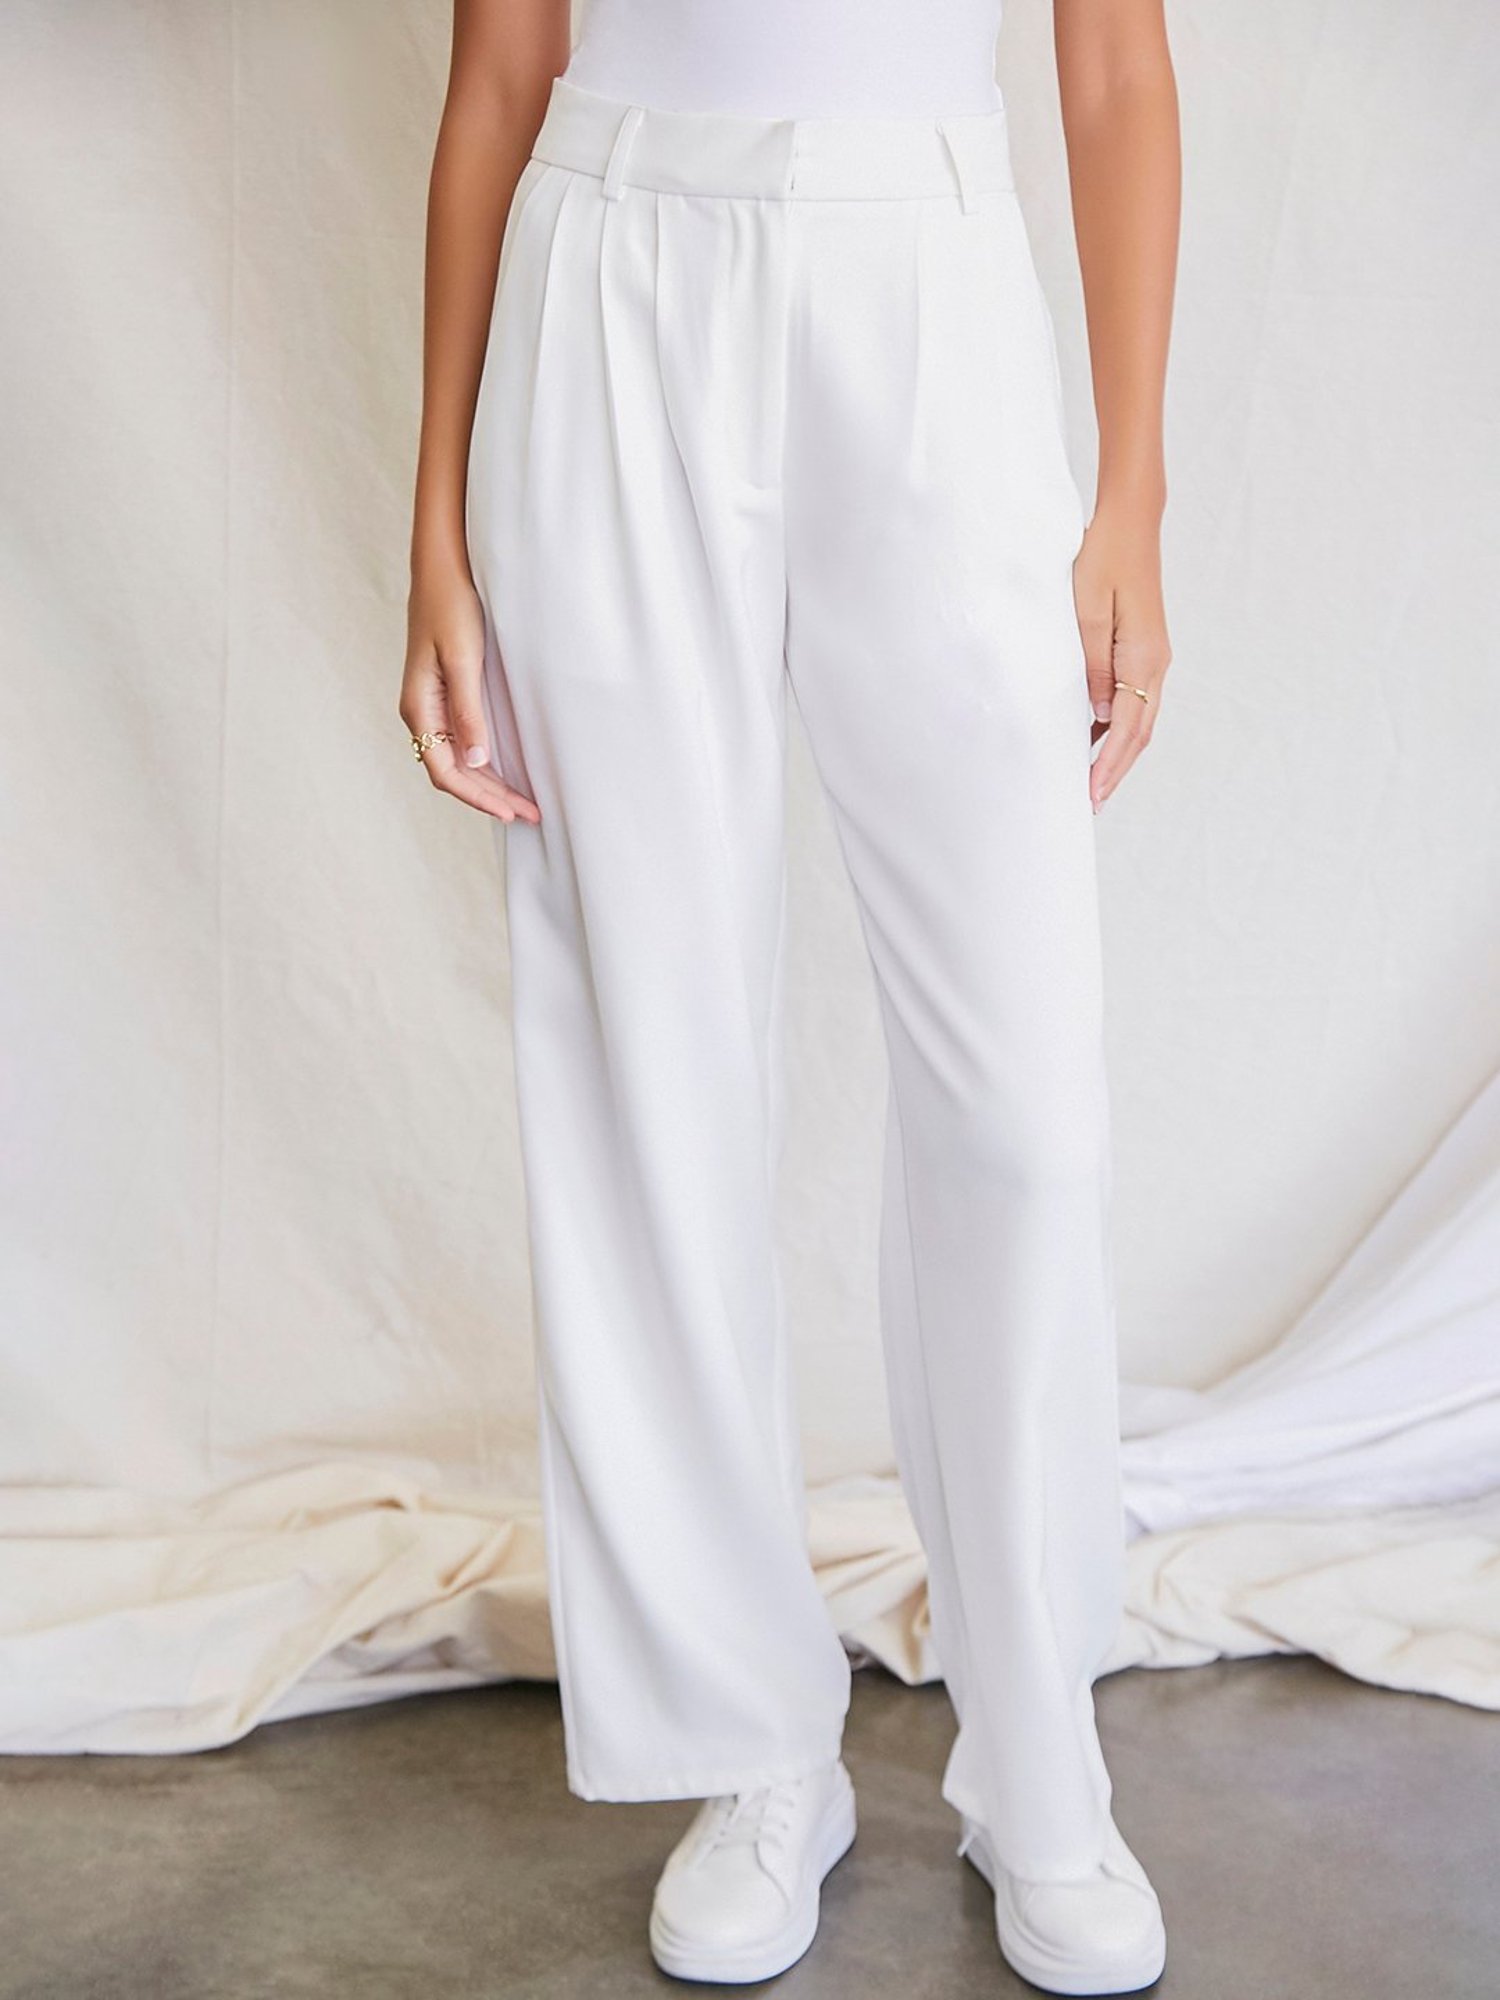 Forever 21  Pants  Jumpsuits  Forever 2 High Waisted Tapered Straight  Leg Trousers With Pockets  Poshmark